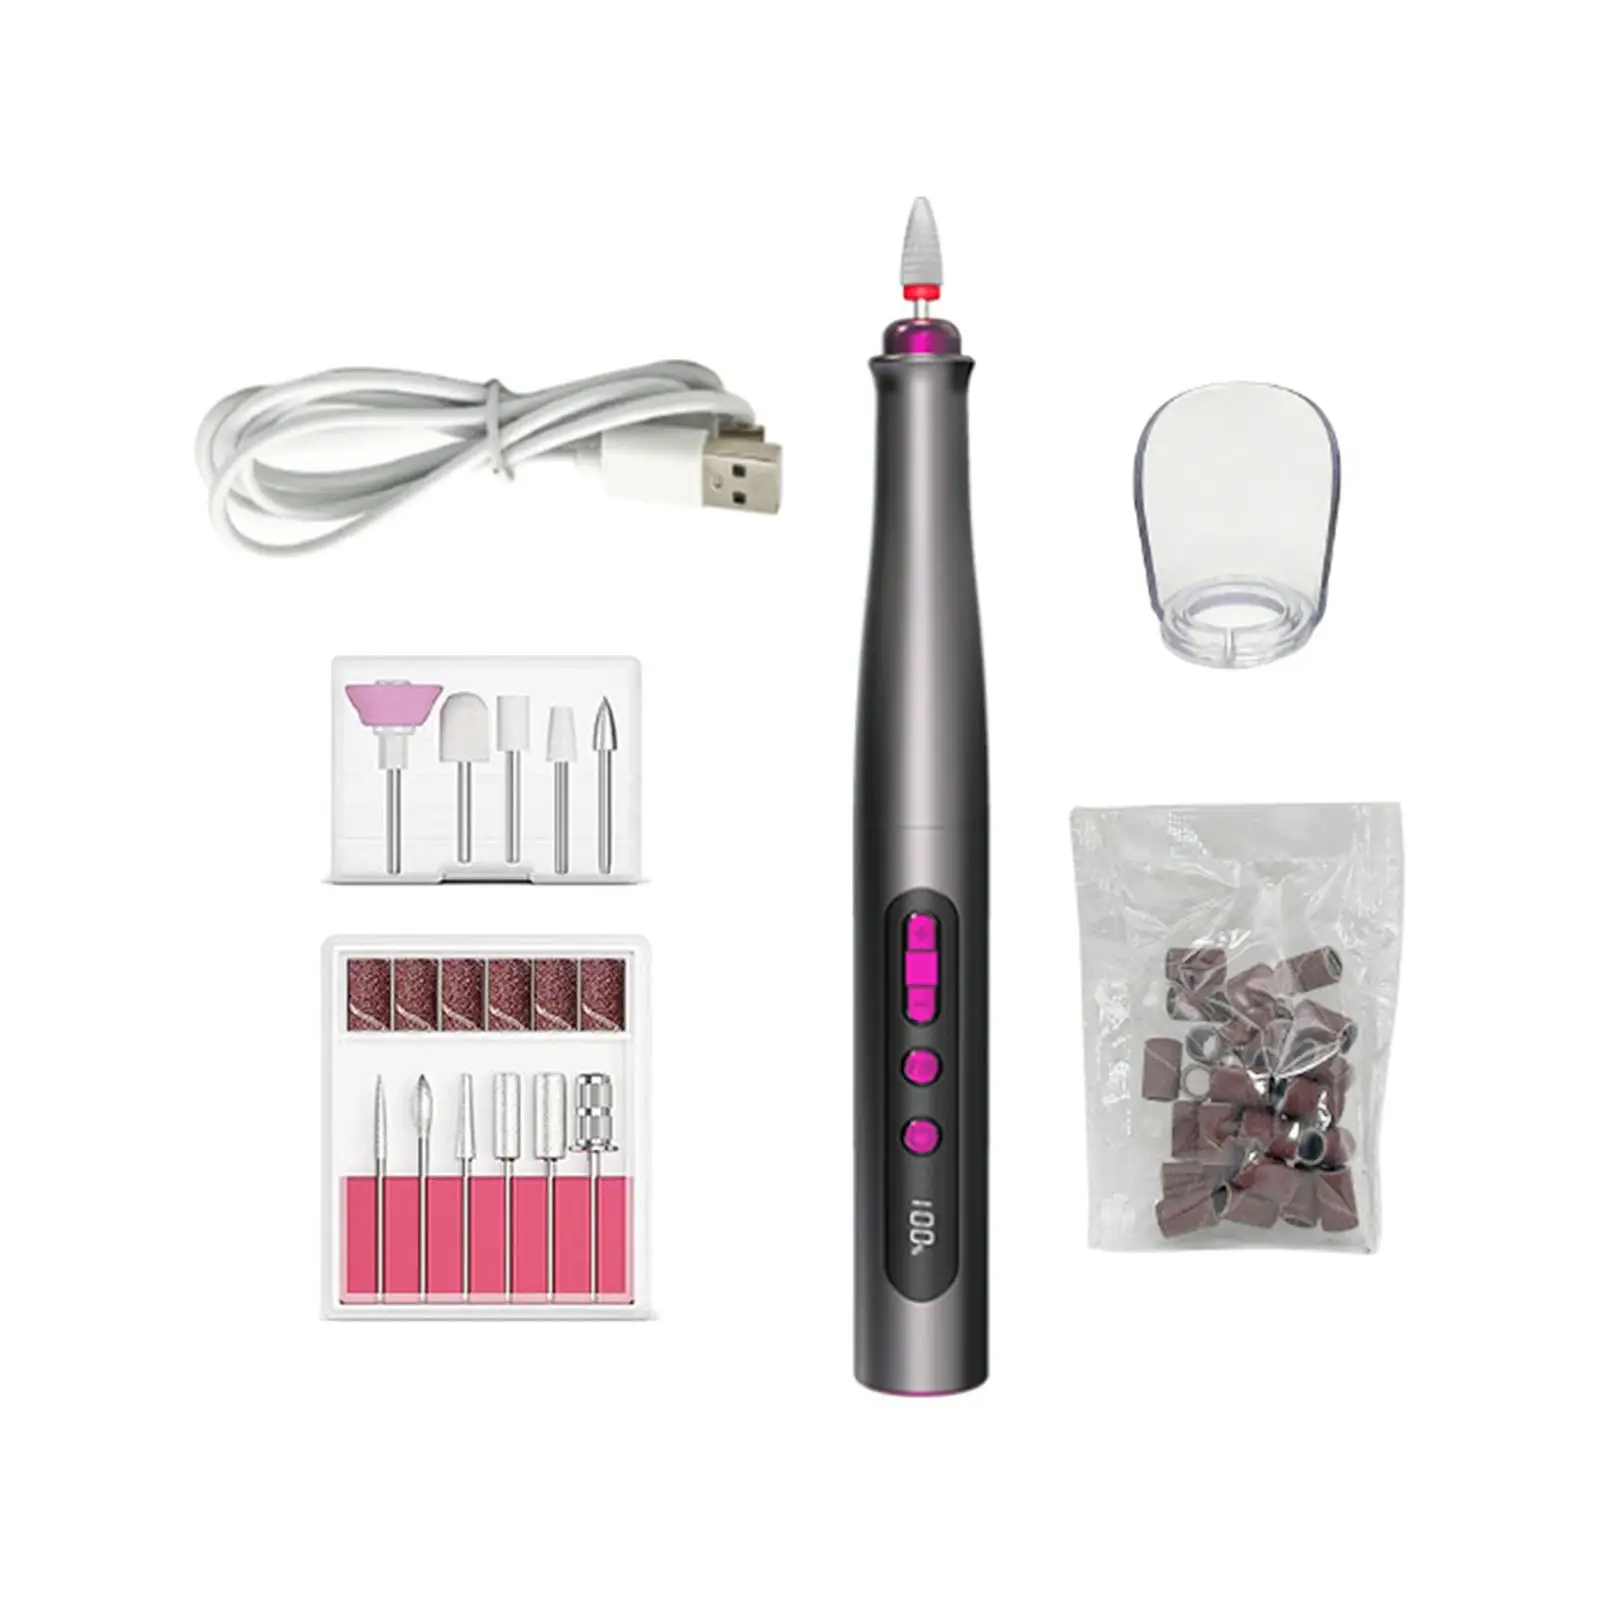 Manicure Pedicure Tool Portable LCD Display Screen Compact Rechargeable Nail Drill Machine for Trimming Polishing Acrylic Nail